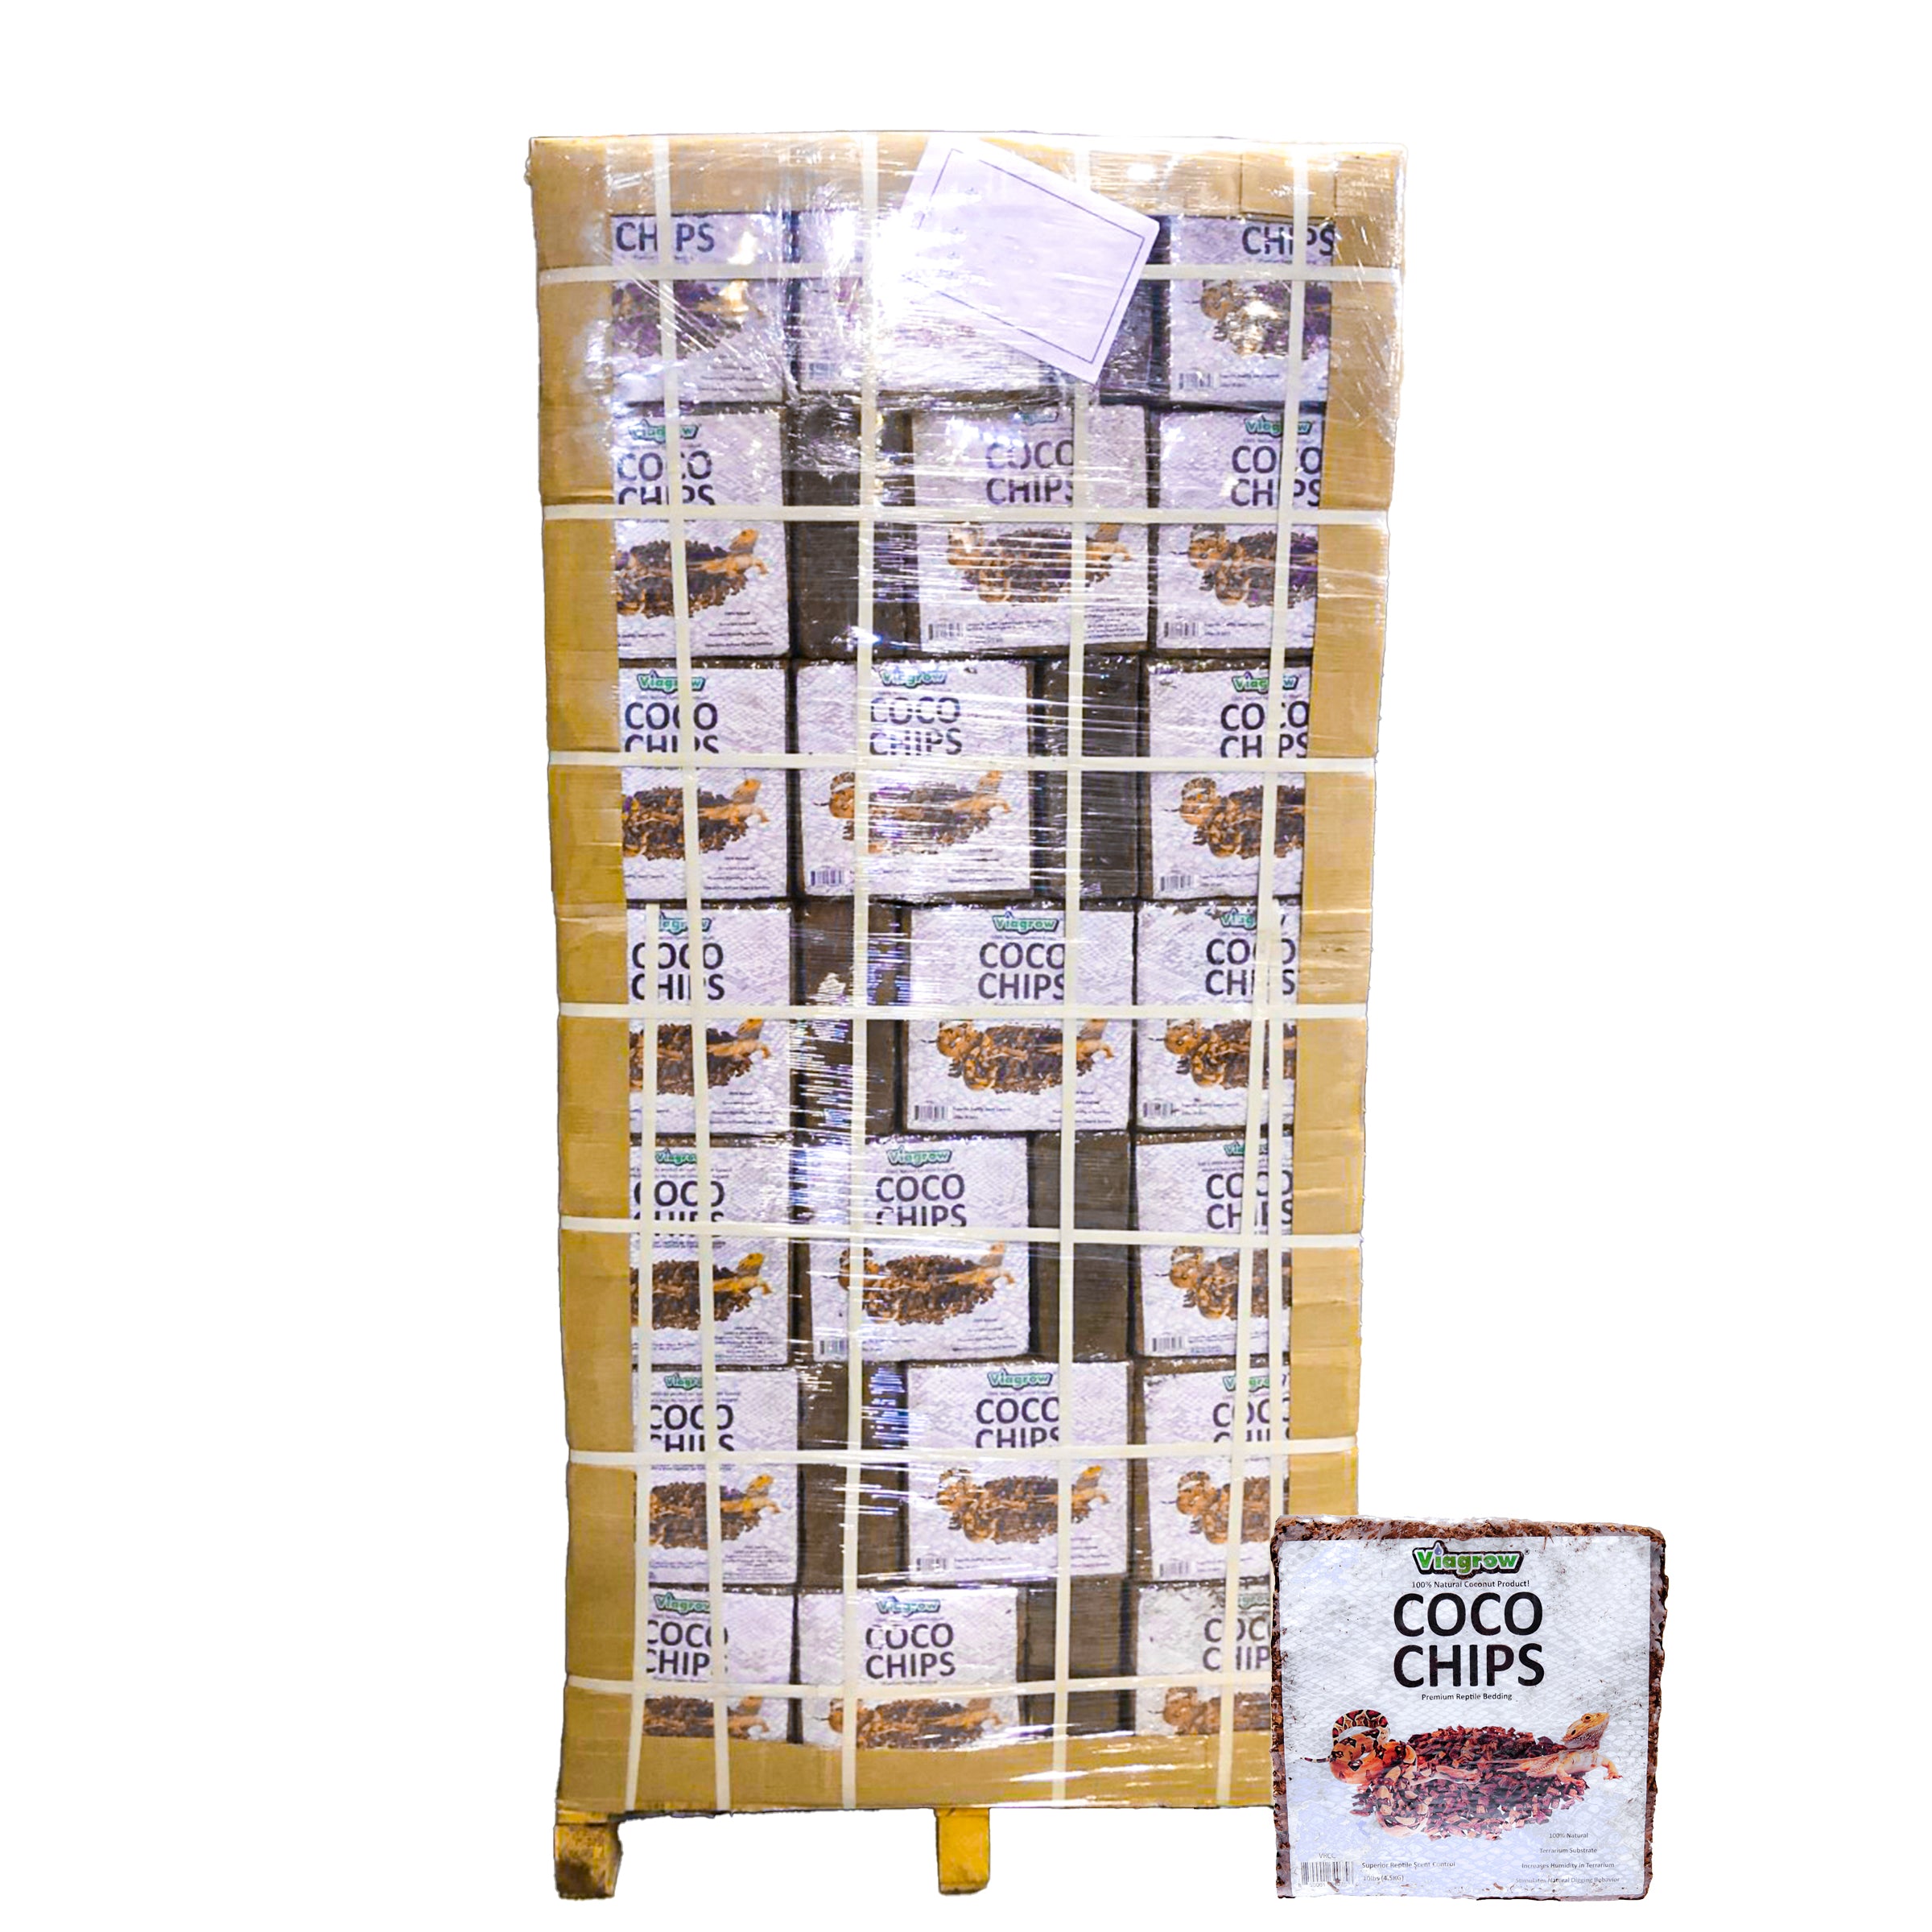 Viagrow 5KG Coco Chips, Pallet of 198